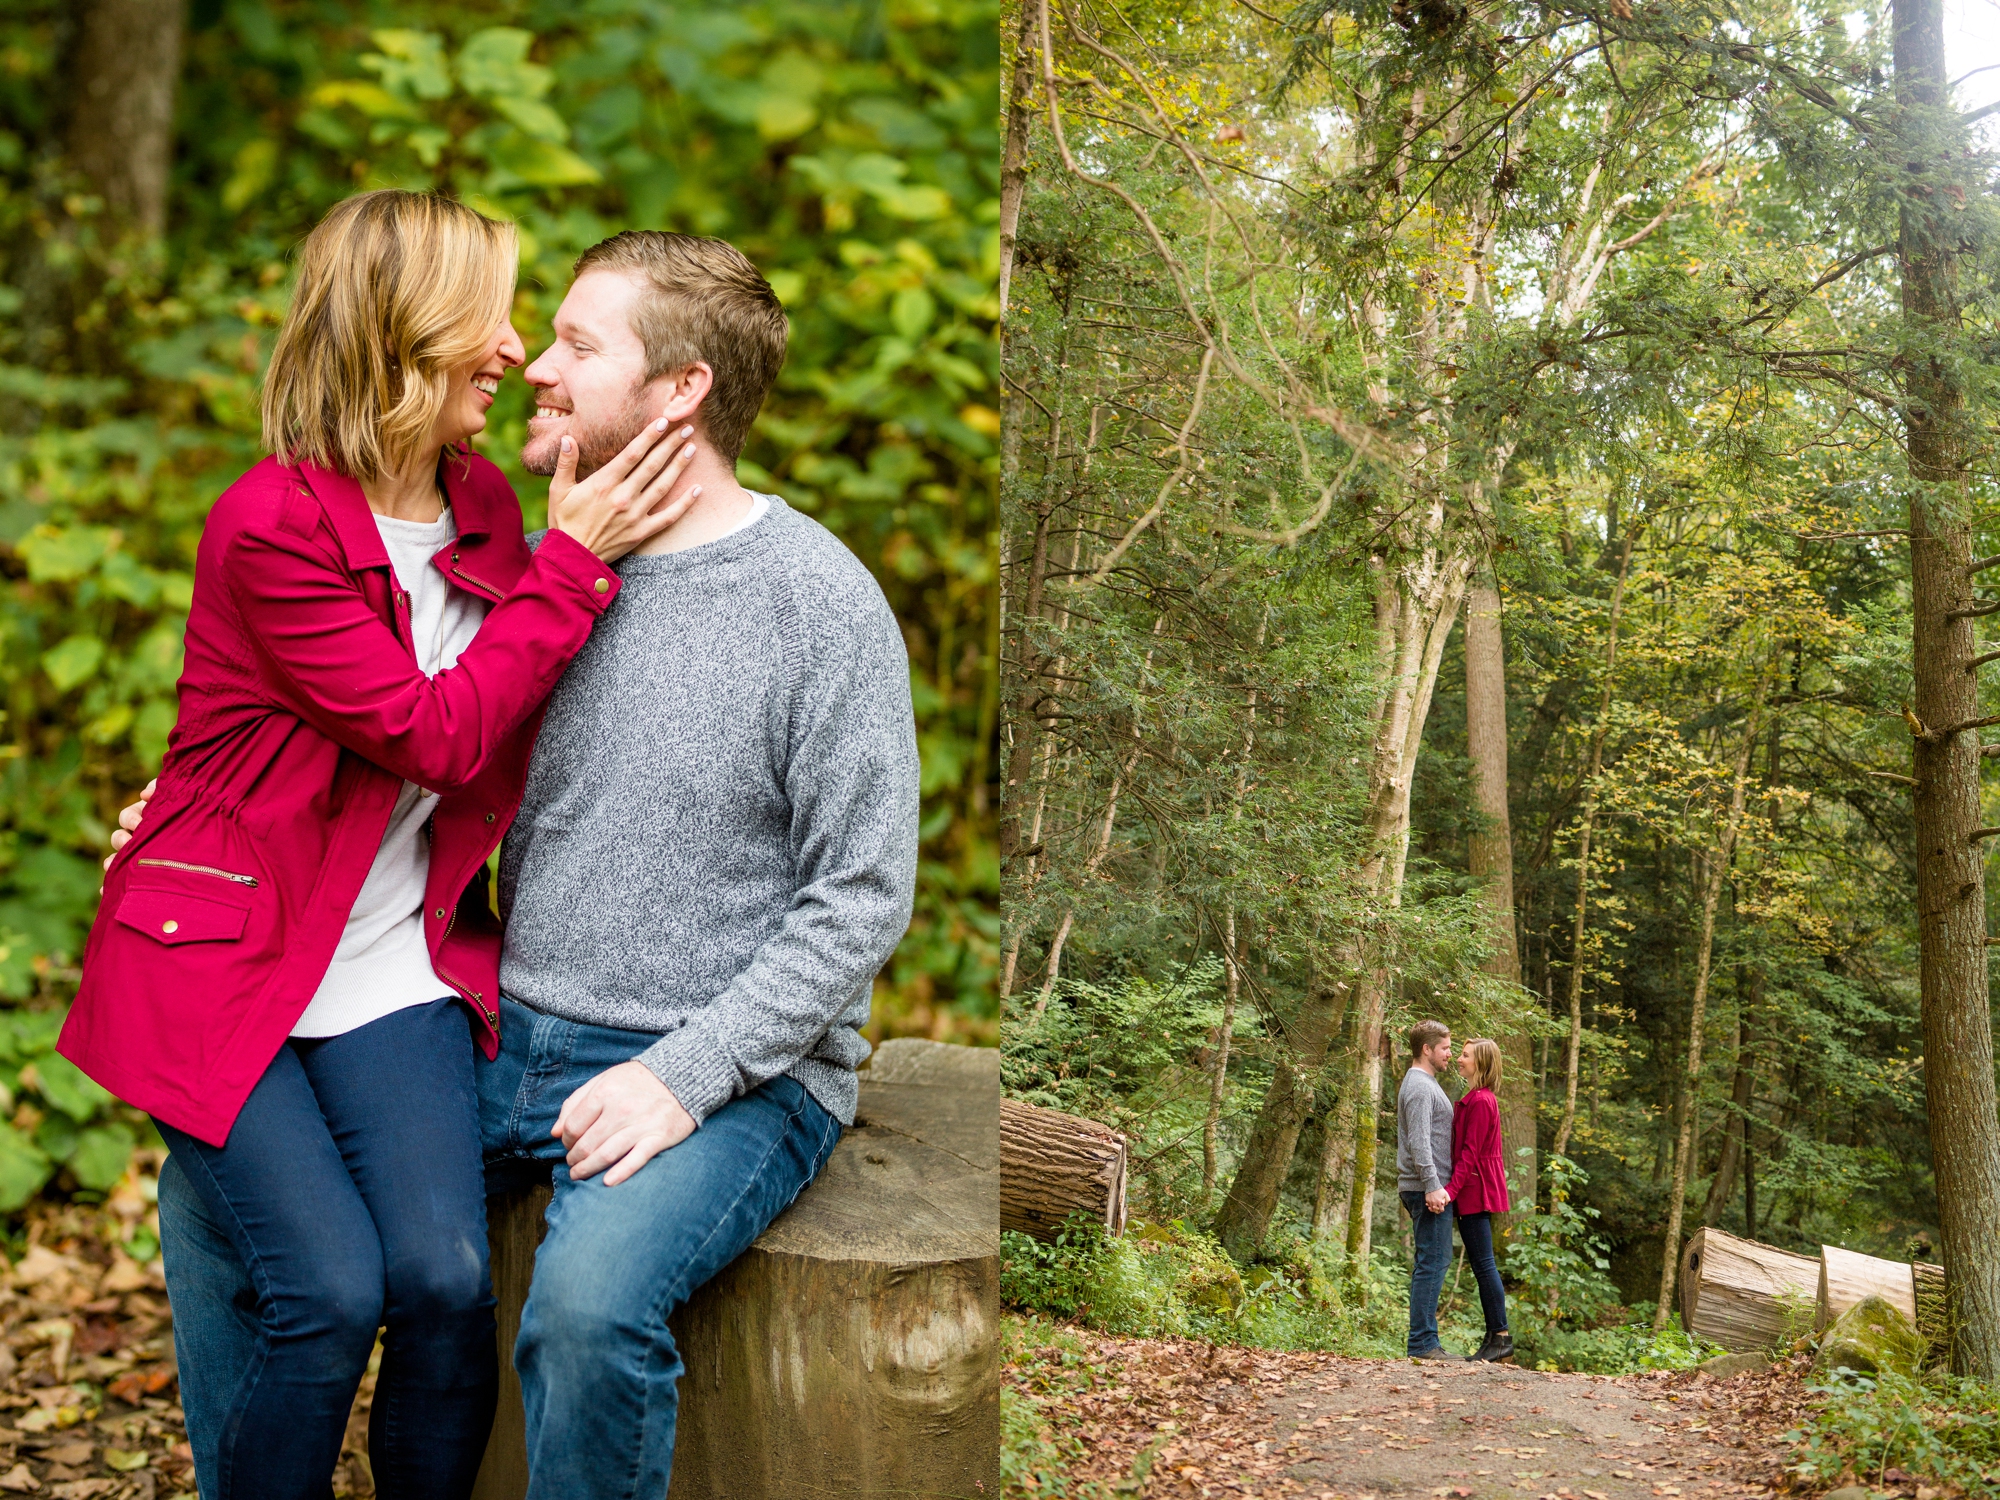 pittsburgh wedding photographer, pittsburgh engagement photos, best spot in pittsburgh for photo shoot, mcconnells mill engagement pictures, mcconnells mill photos